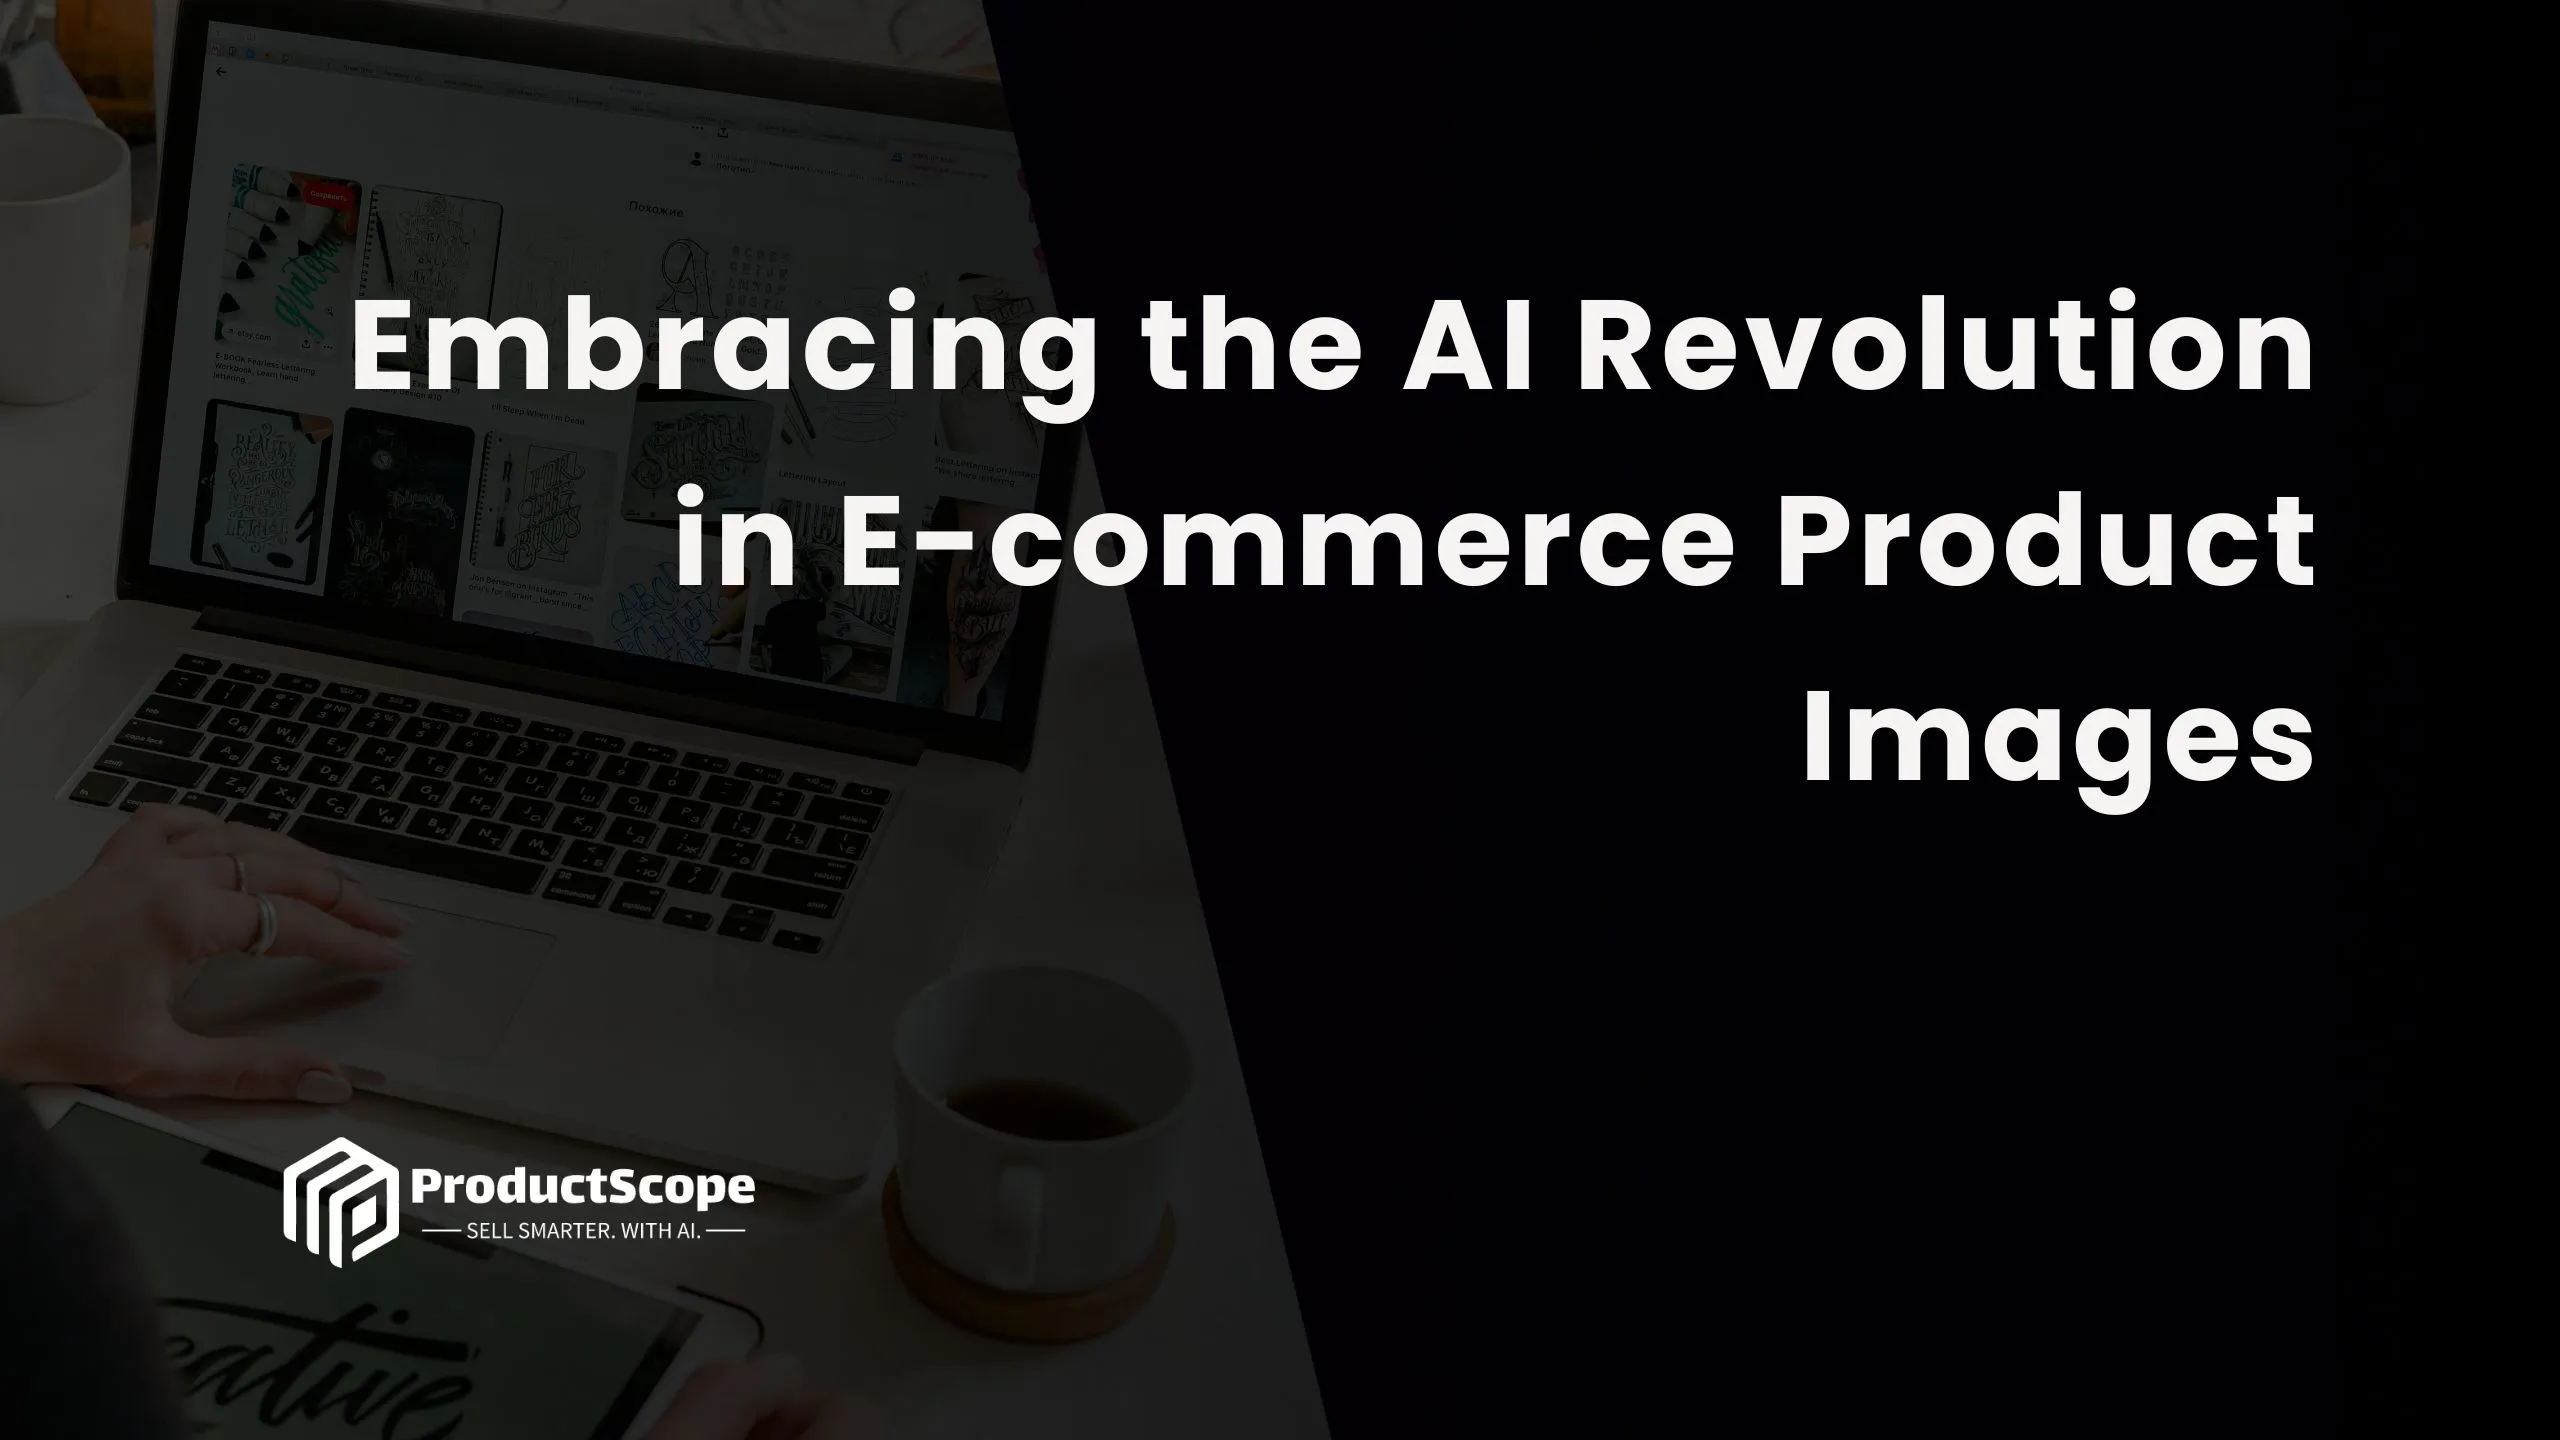 Embracing the AI Revolution in E-commerce Product Images